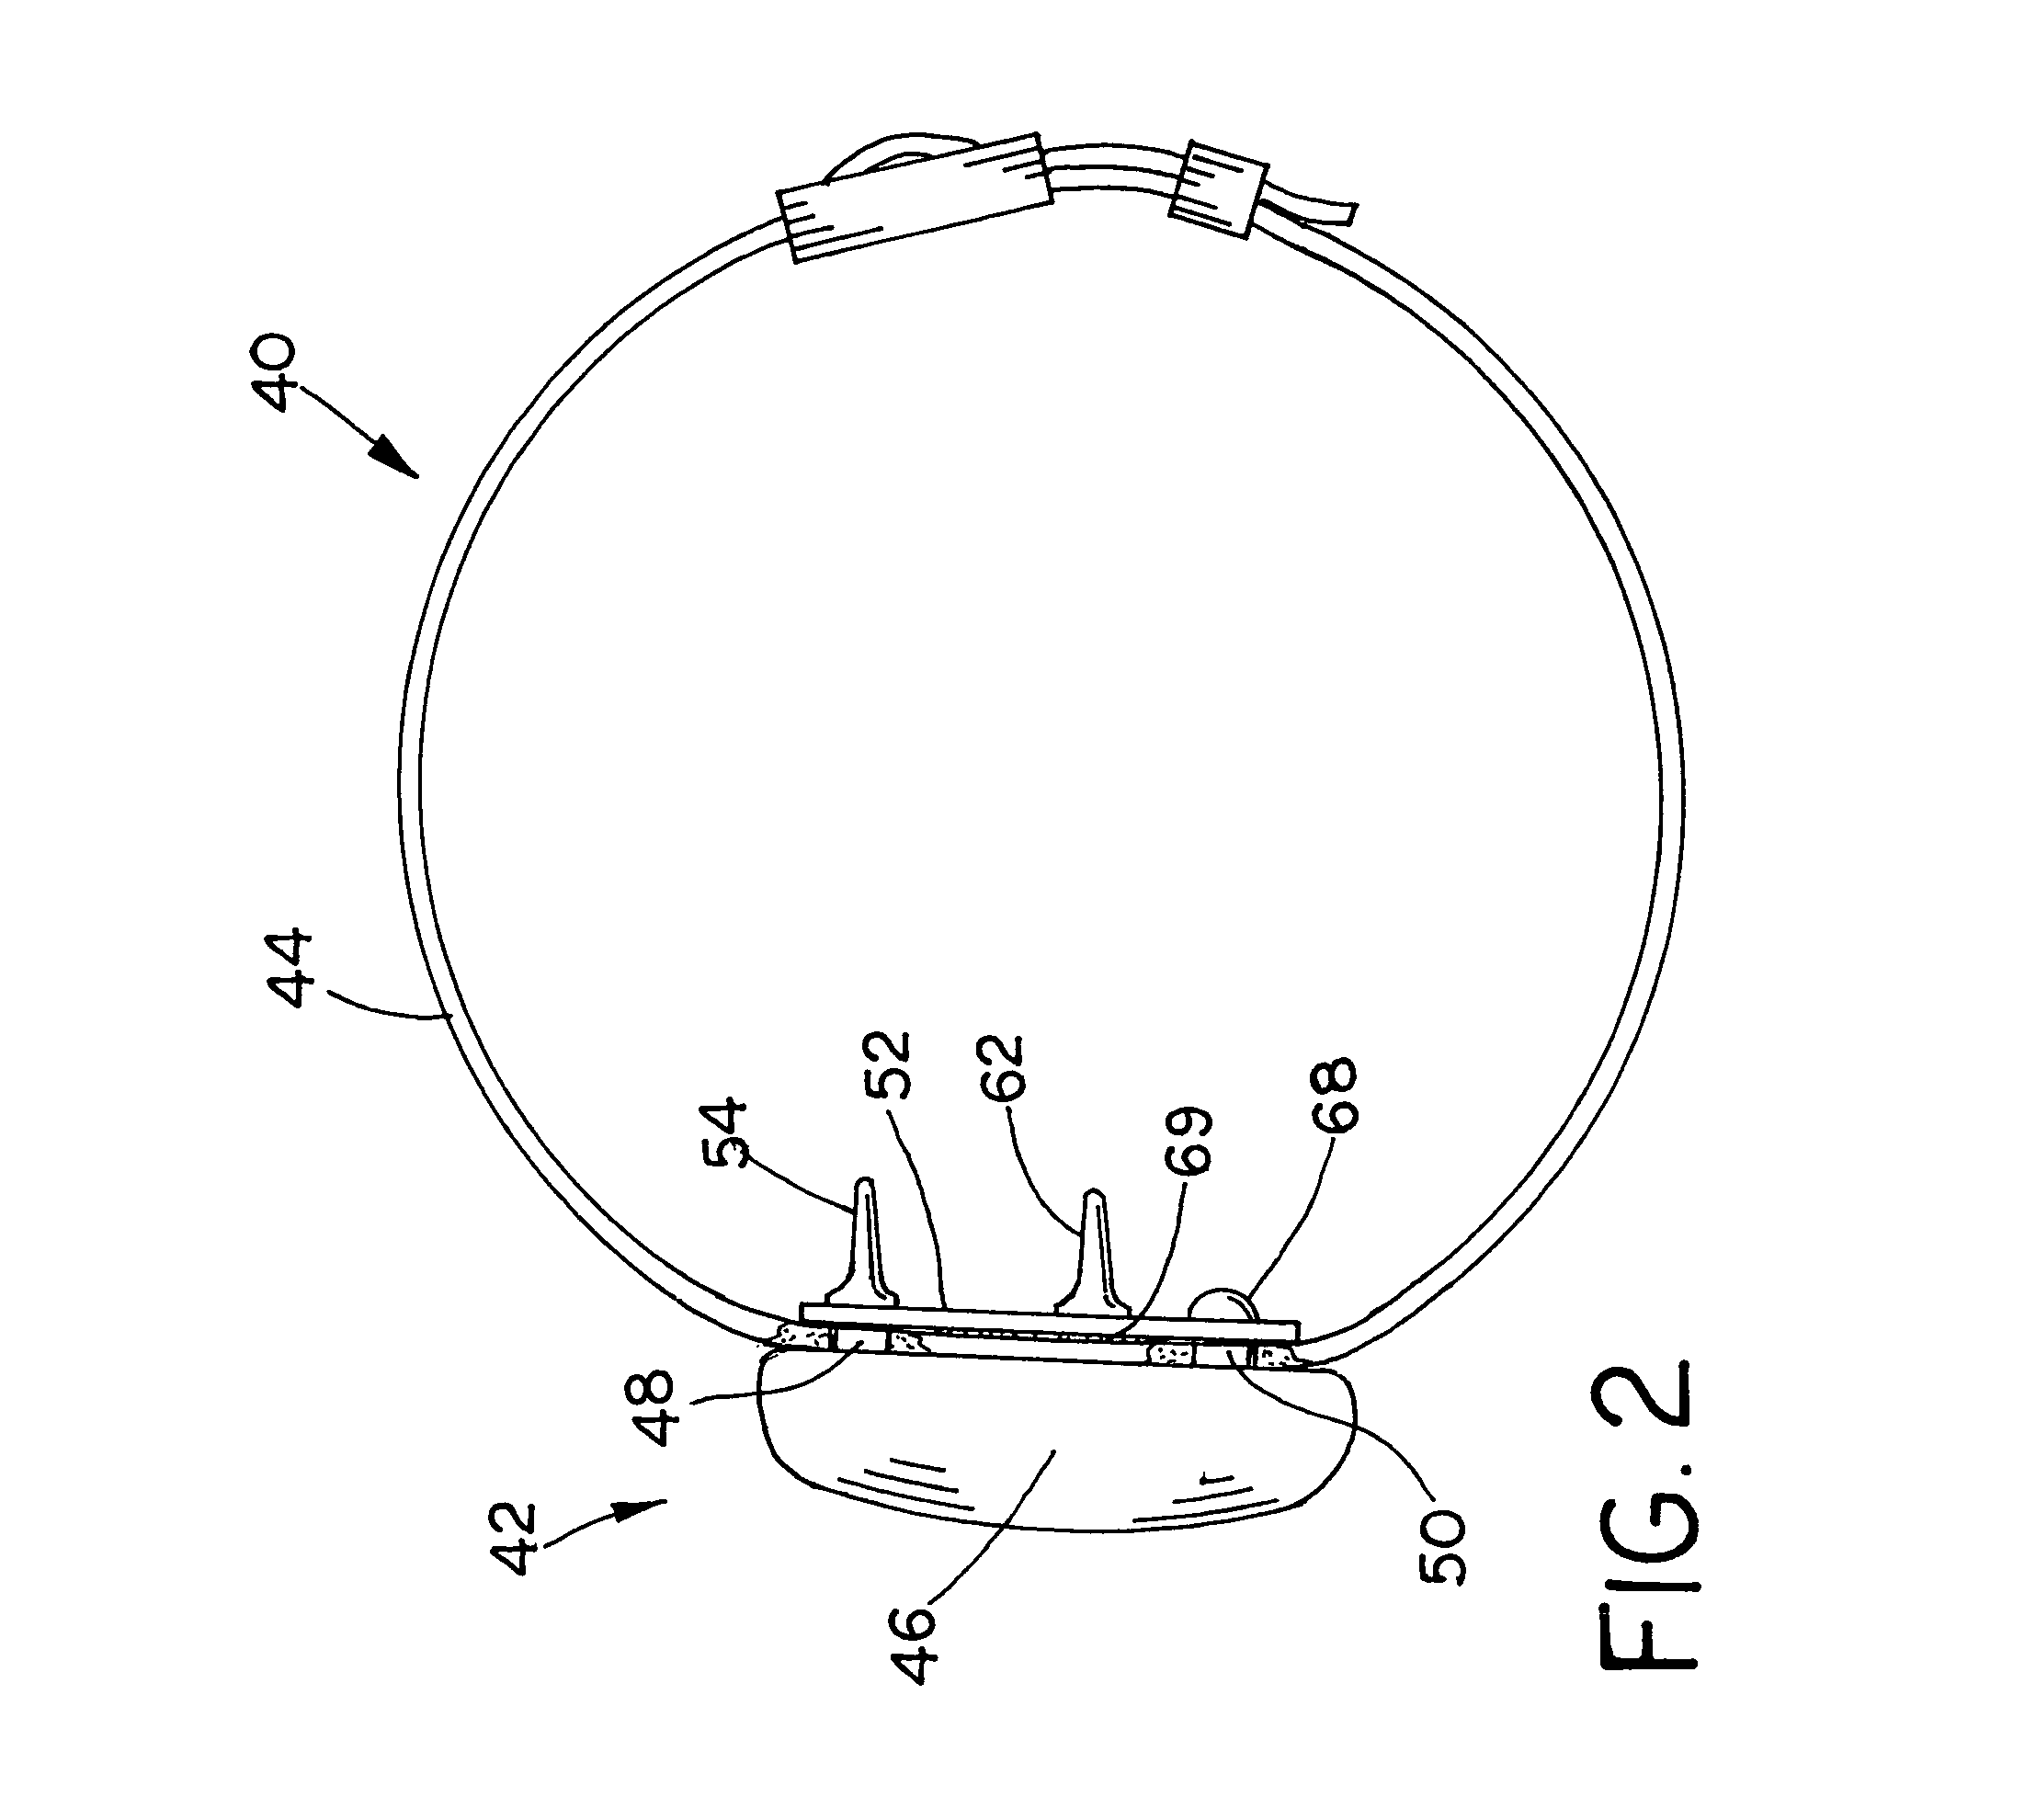 Method and apparatus for adjusting the correction level of an animal training receiver